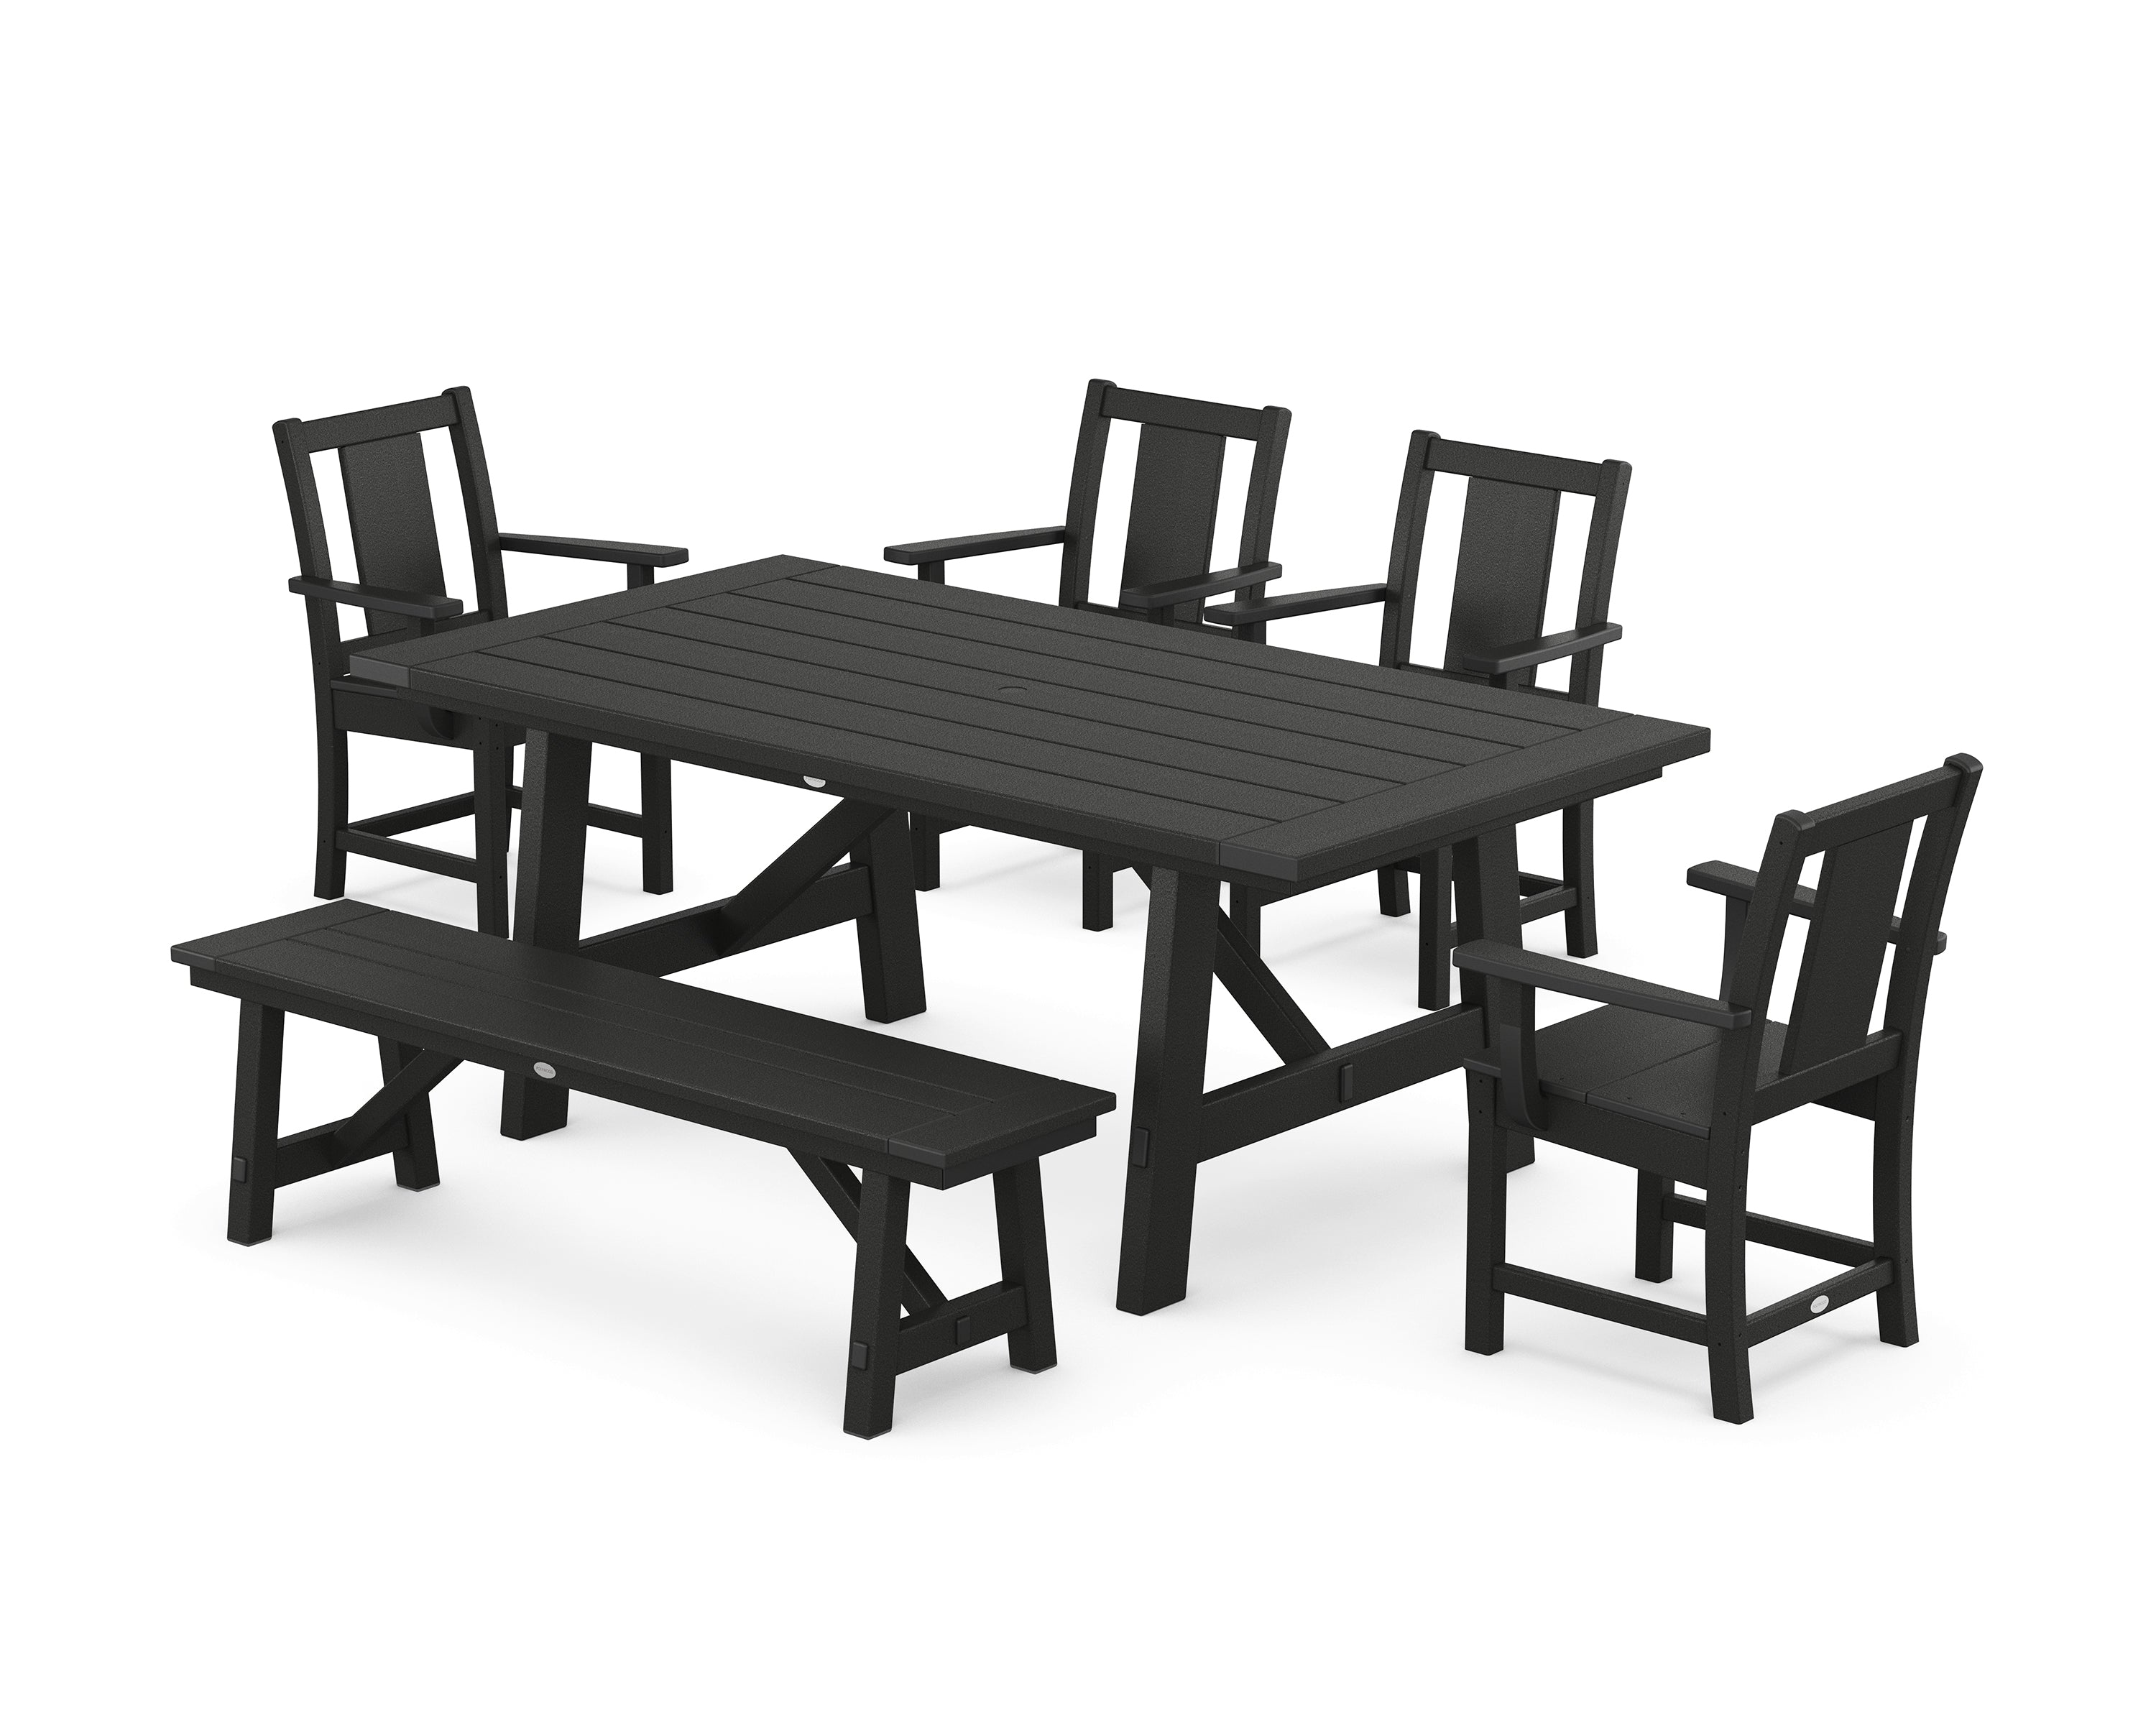 POLYWOOD® Prairie 6-Piece Rustic Farmhouse Dining Set with Bench in Black